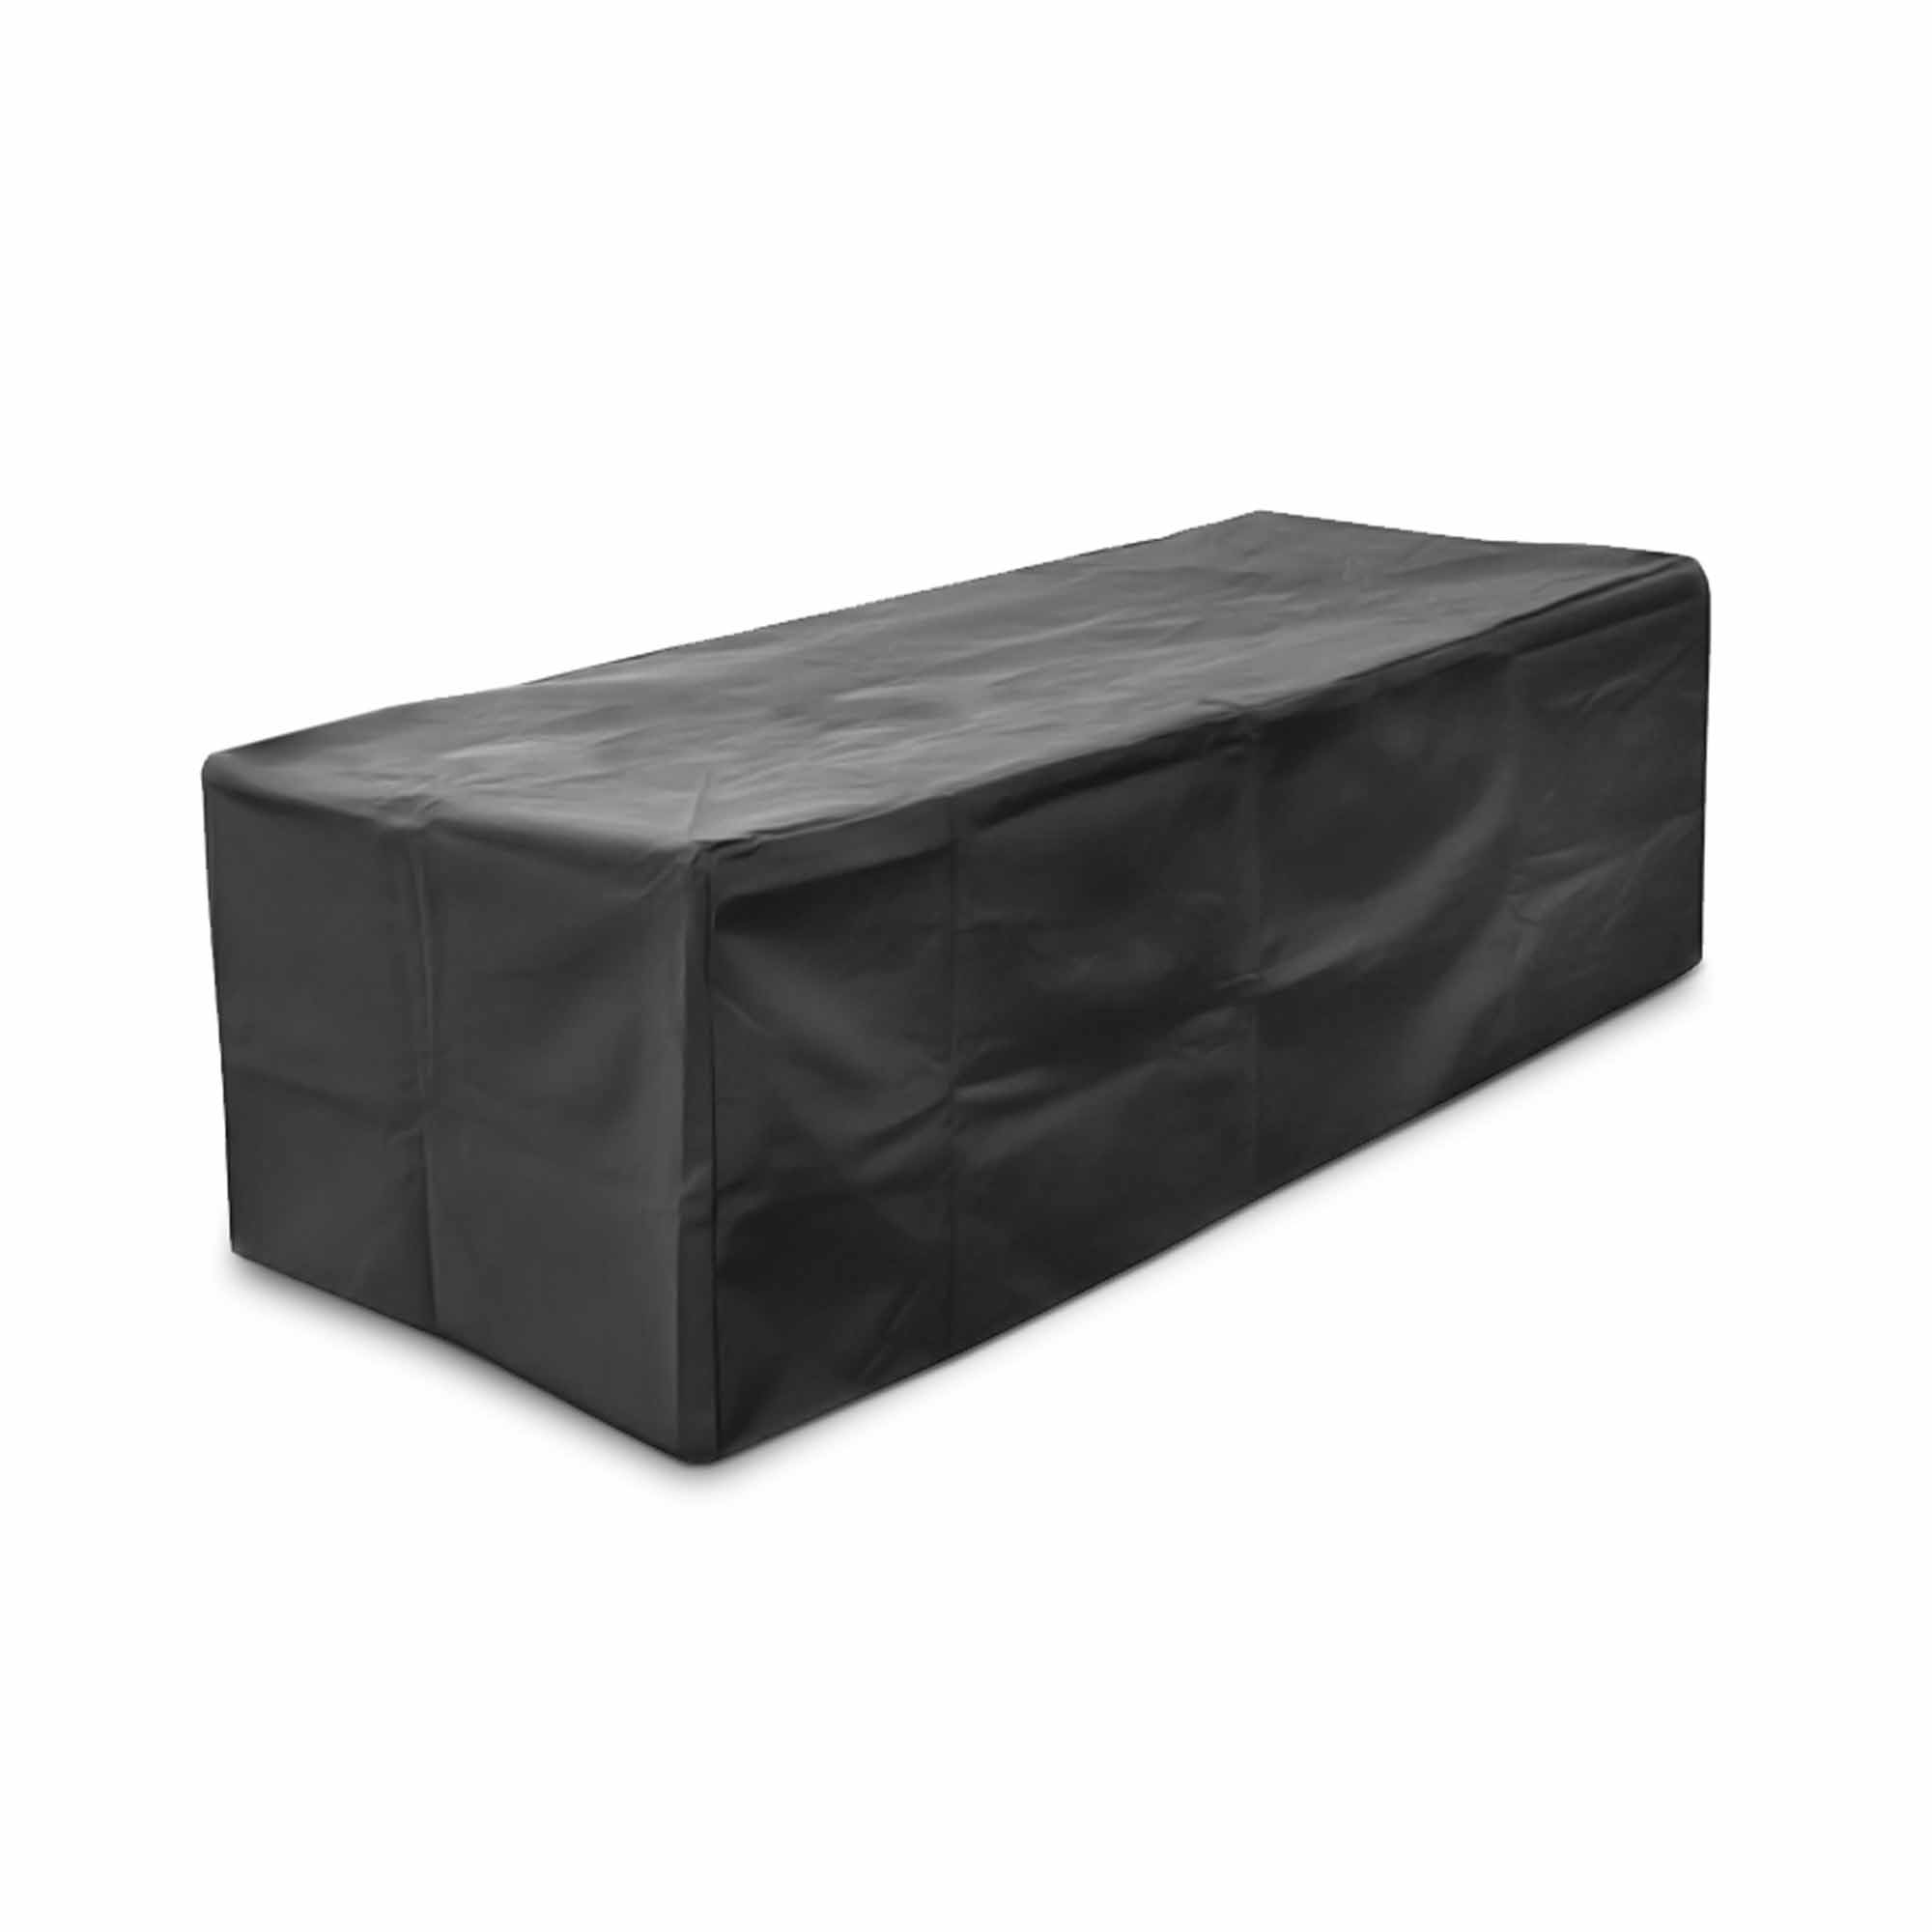 Rectangular Fire Pit Covers The, Rectangular Fire Pit Cover